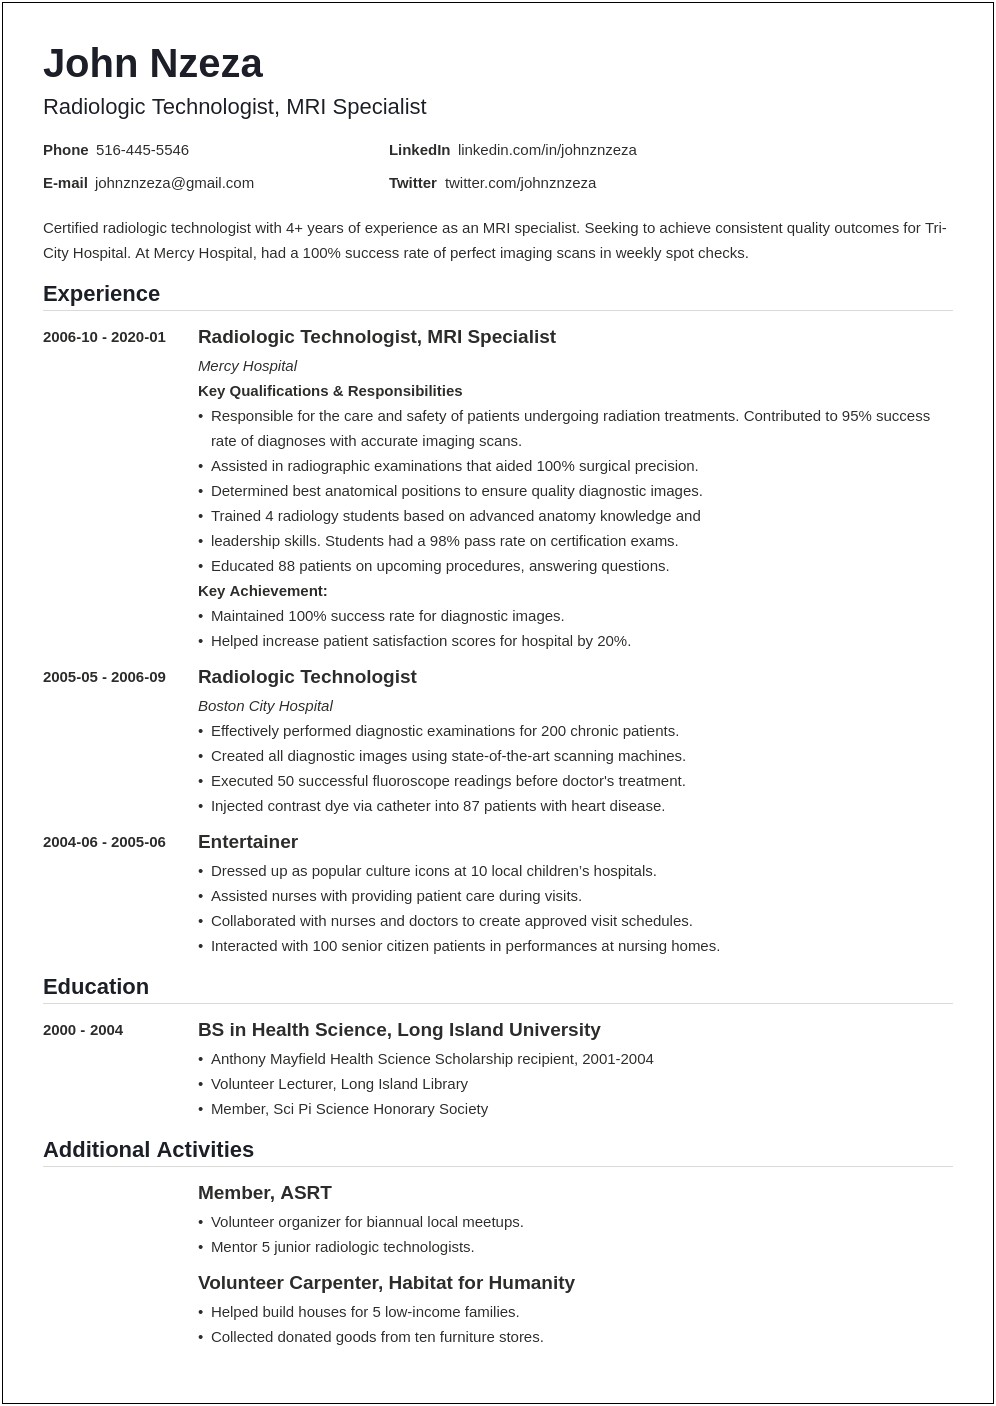 Resume Objective For Ct Technologist